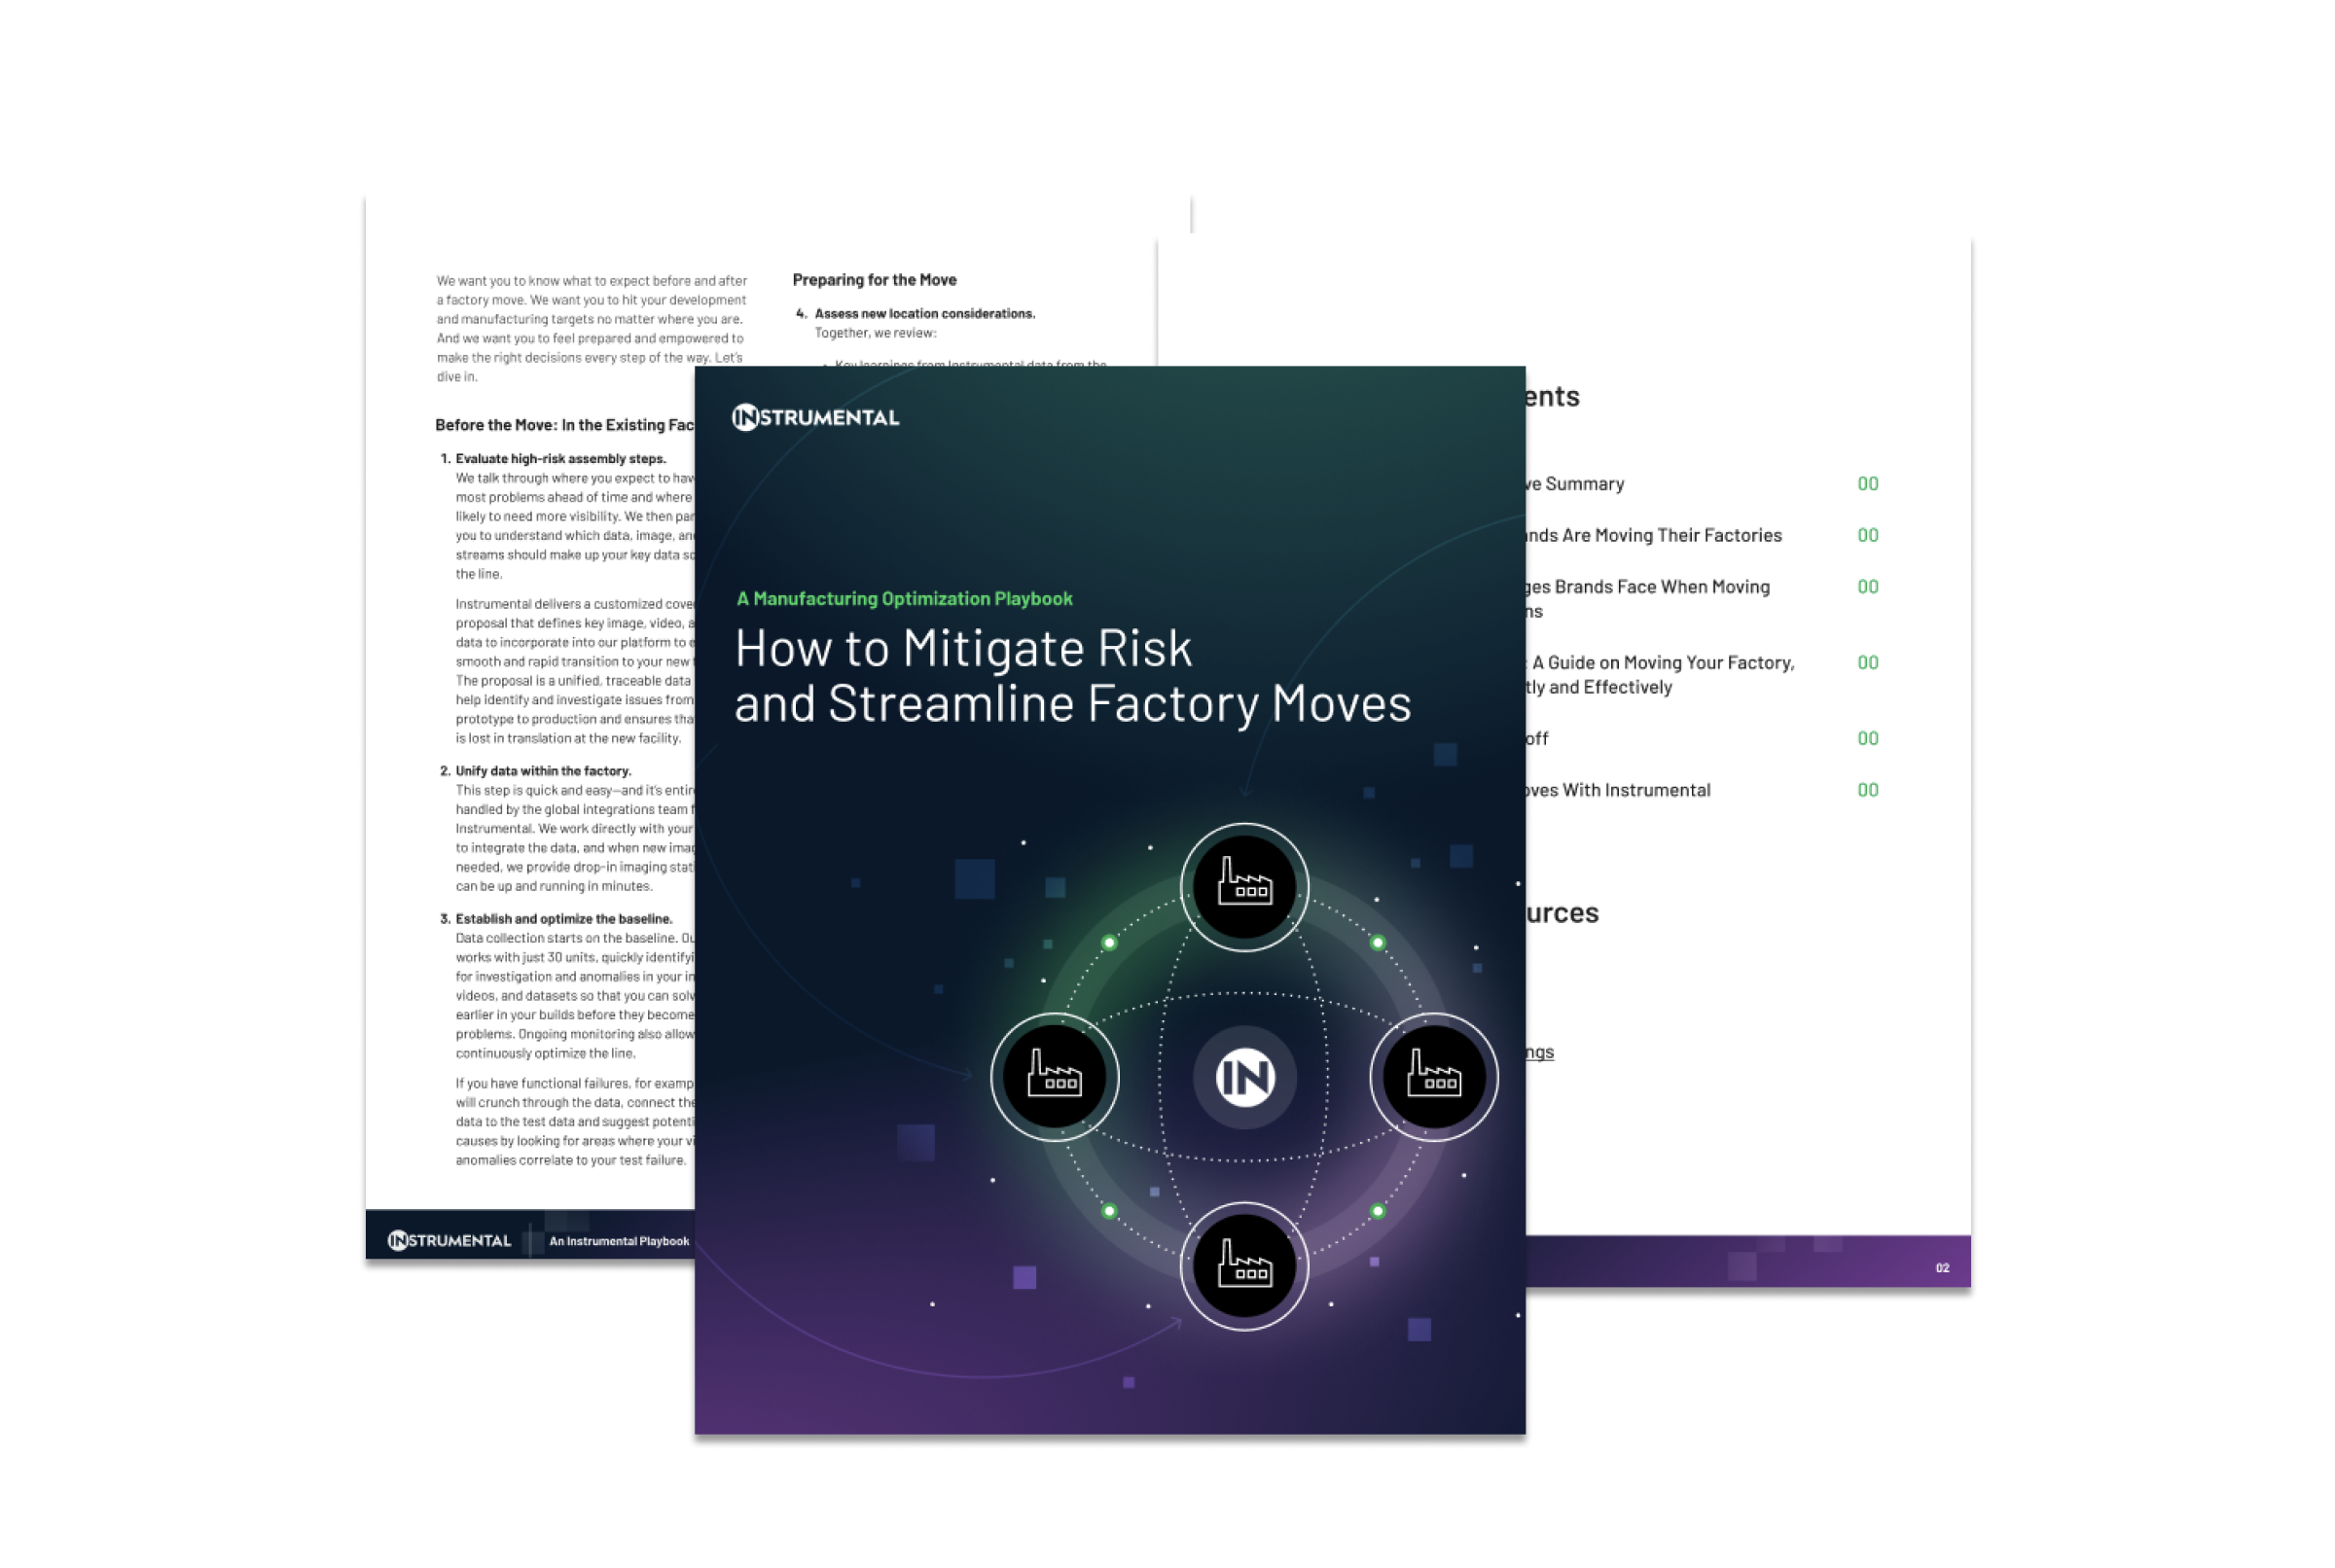 Download the Instrumental playbook to factory moves and mitigating risk featured image